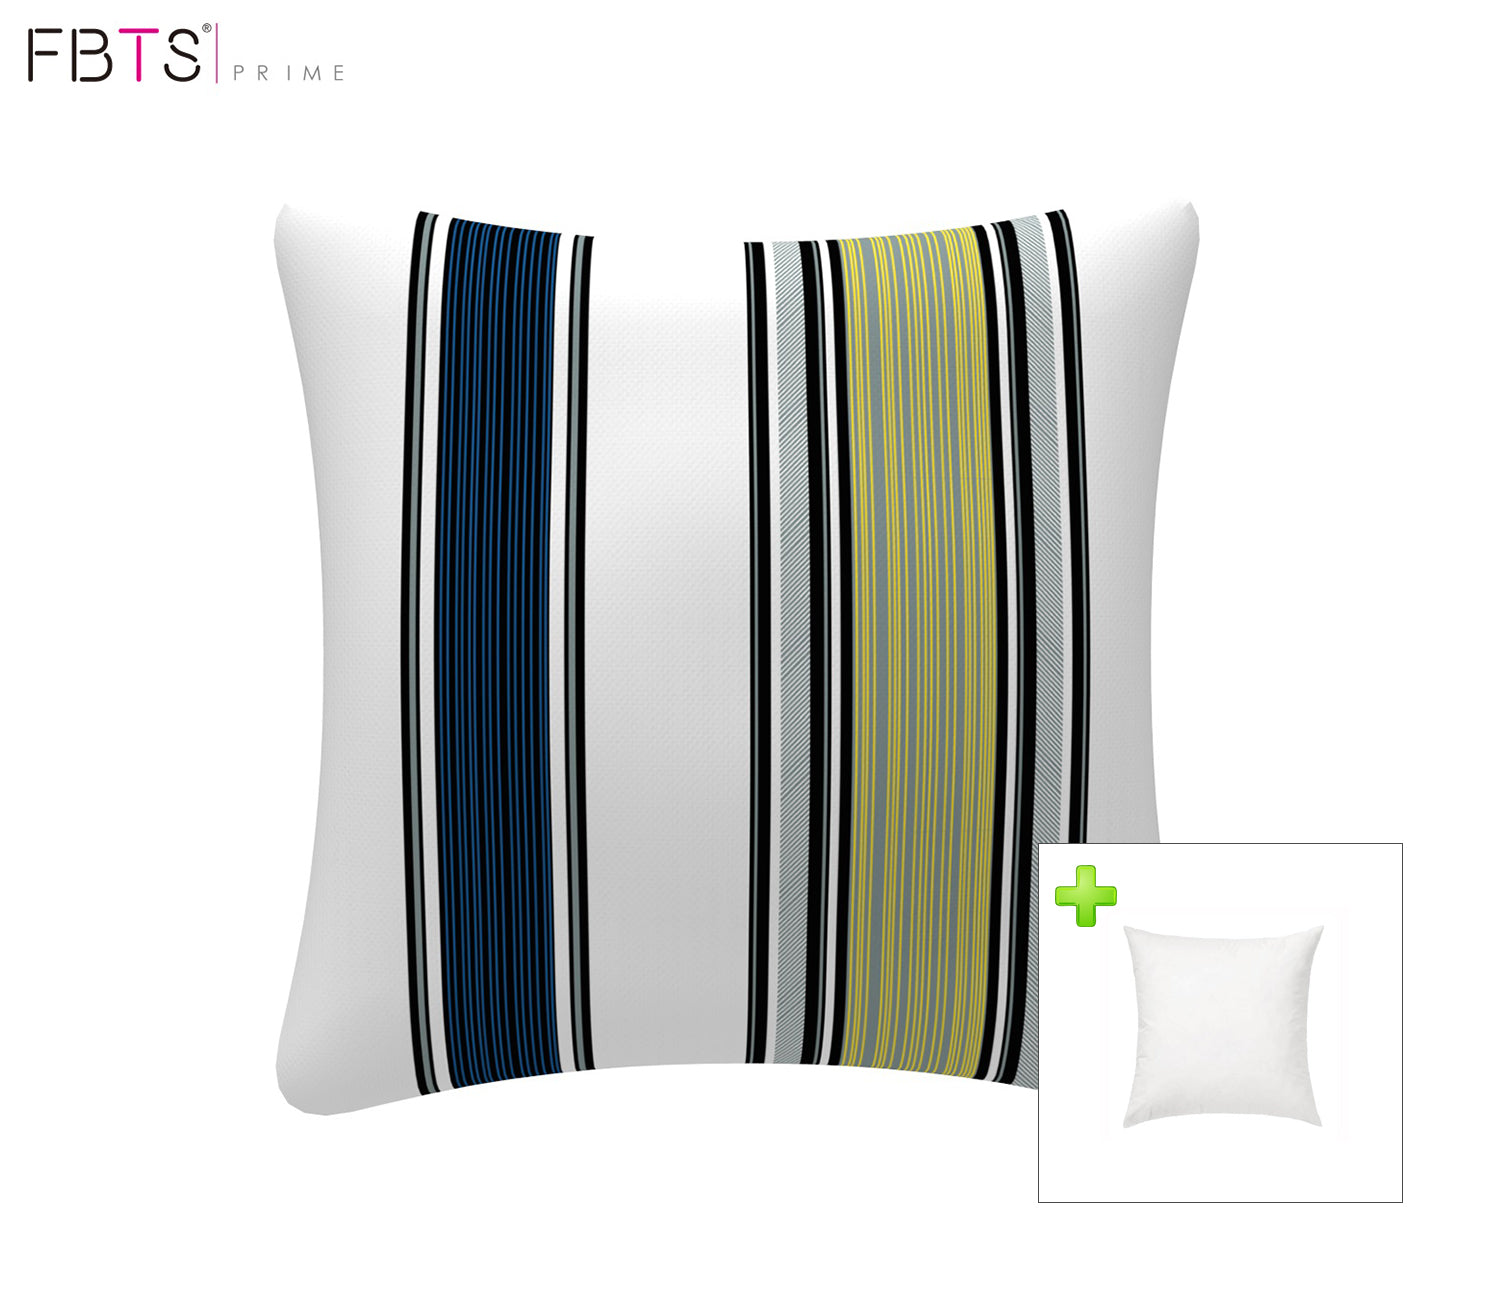 Outdoor Pillows with Insert Navy and Yellow Stripe Patio Accent Throw Pillows 18x18 inch Square Decorative Pillows